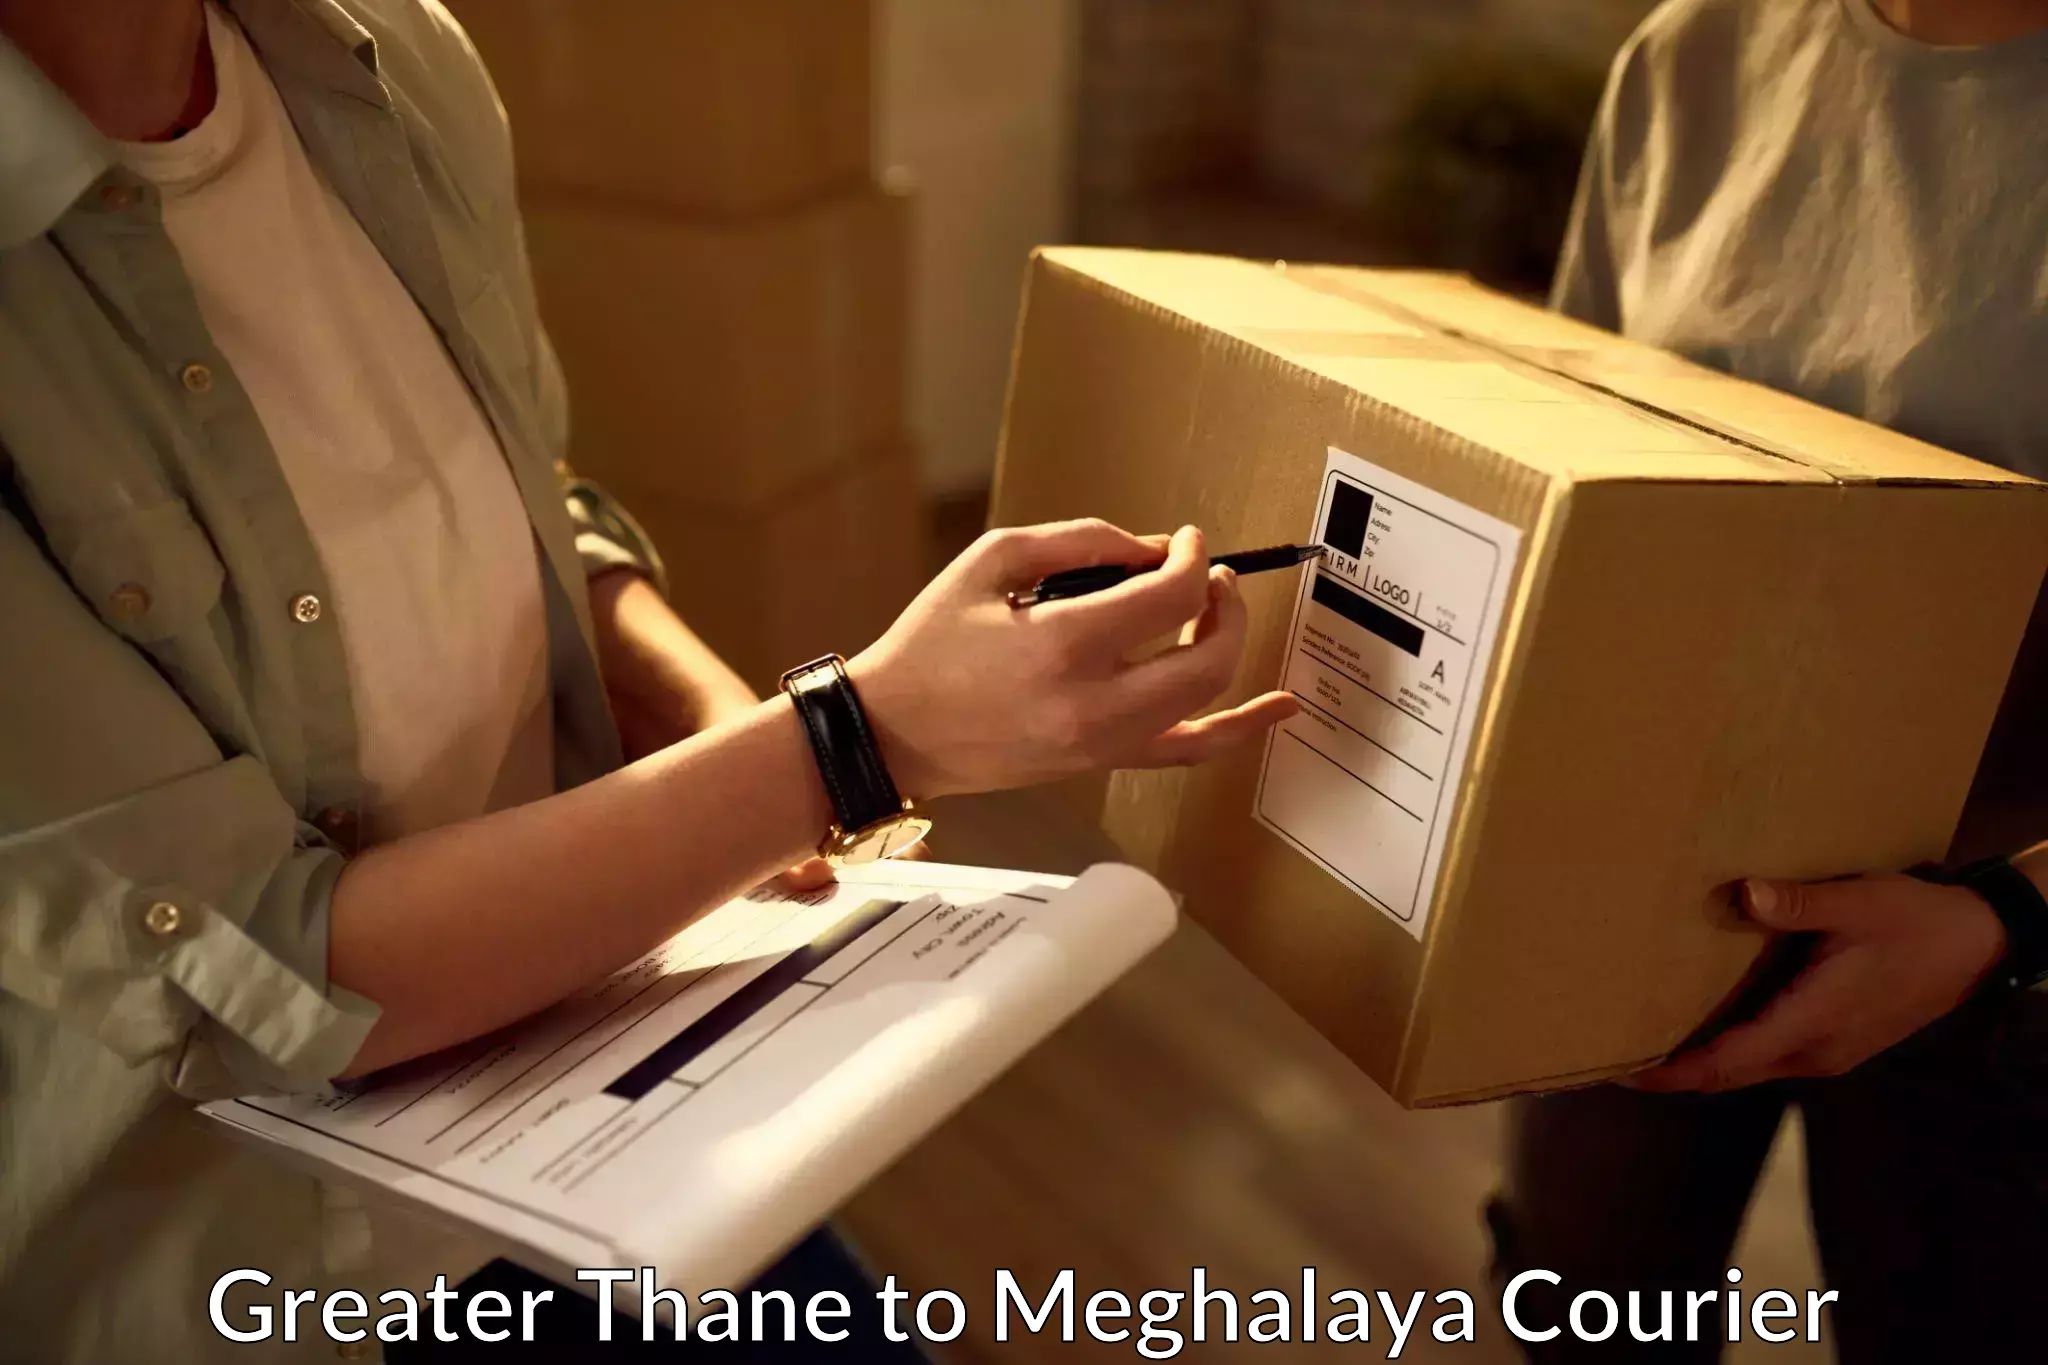 Local delivery service Greater Thane to Meghalaya